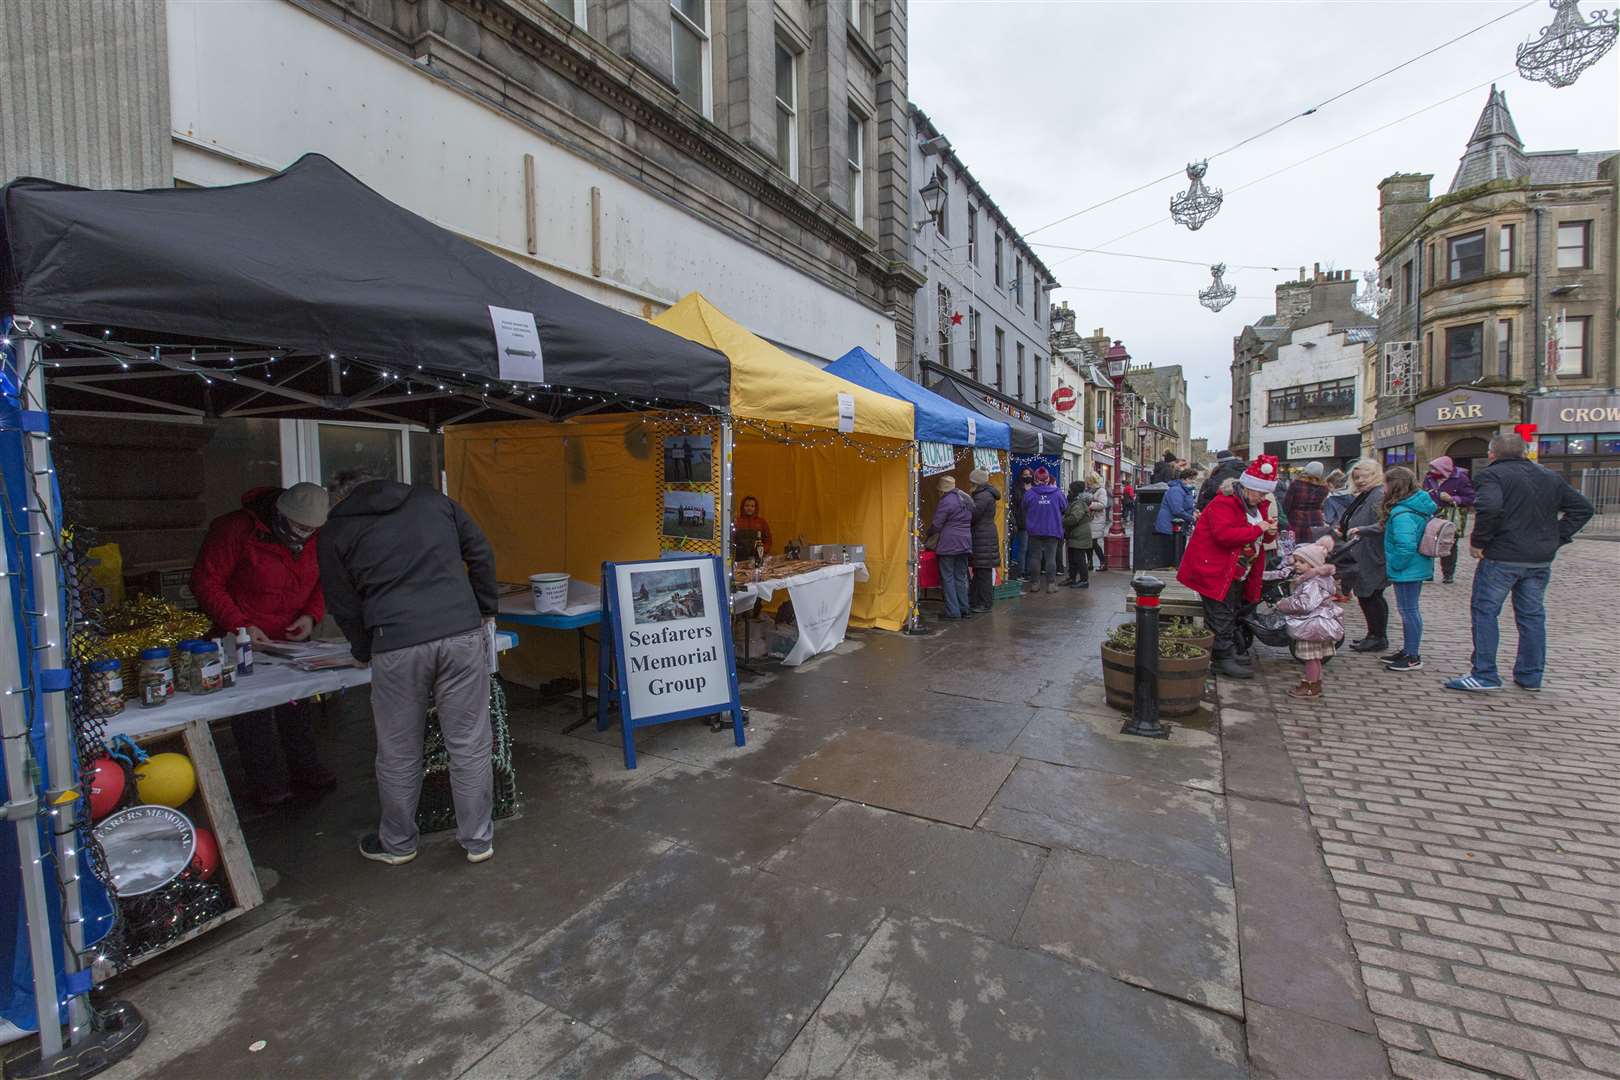 Some of the gazebos from the Wick Community Market group during last year's festive season. Photo: Robert MacDonald/Northern Studios